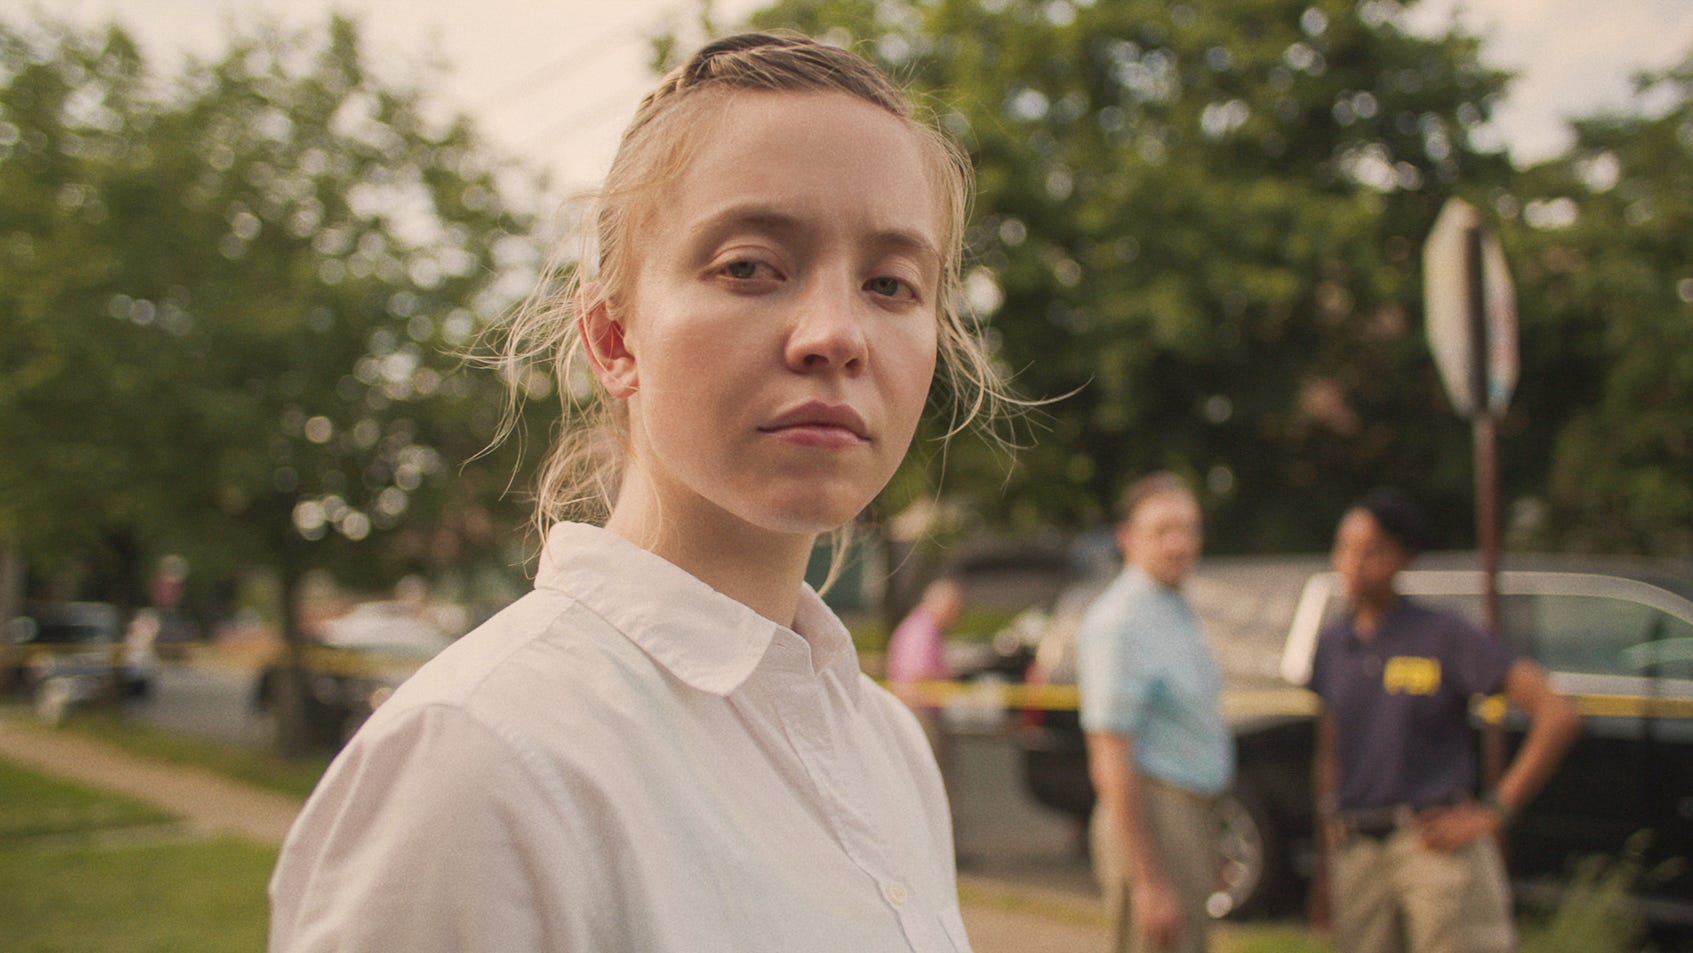 "It was an exercise for my brain," Sydney Sweeney says of the dialogue-heavy "Reality," which shot in just 16 days. "My memorization skills are much better now."